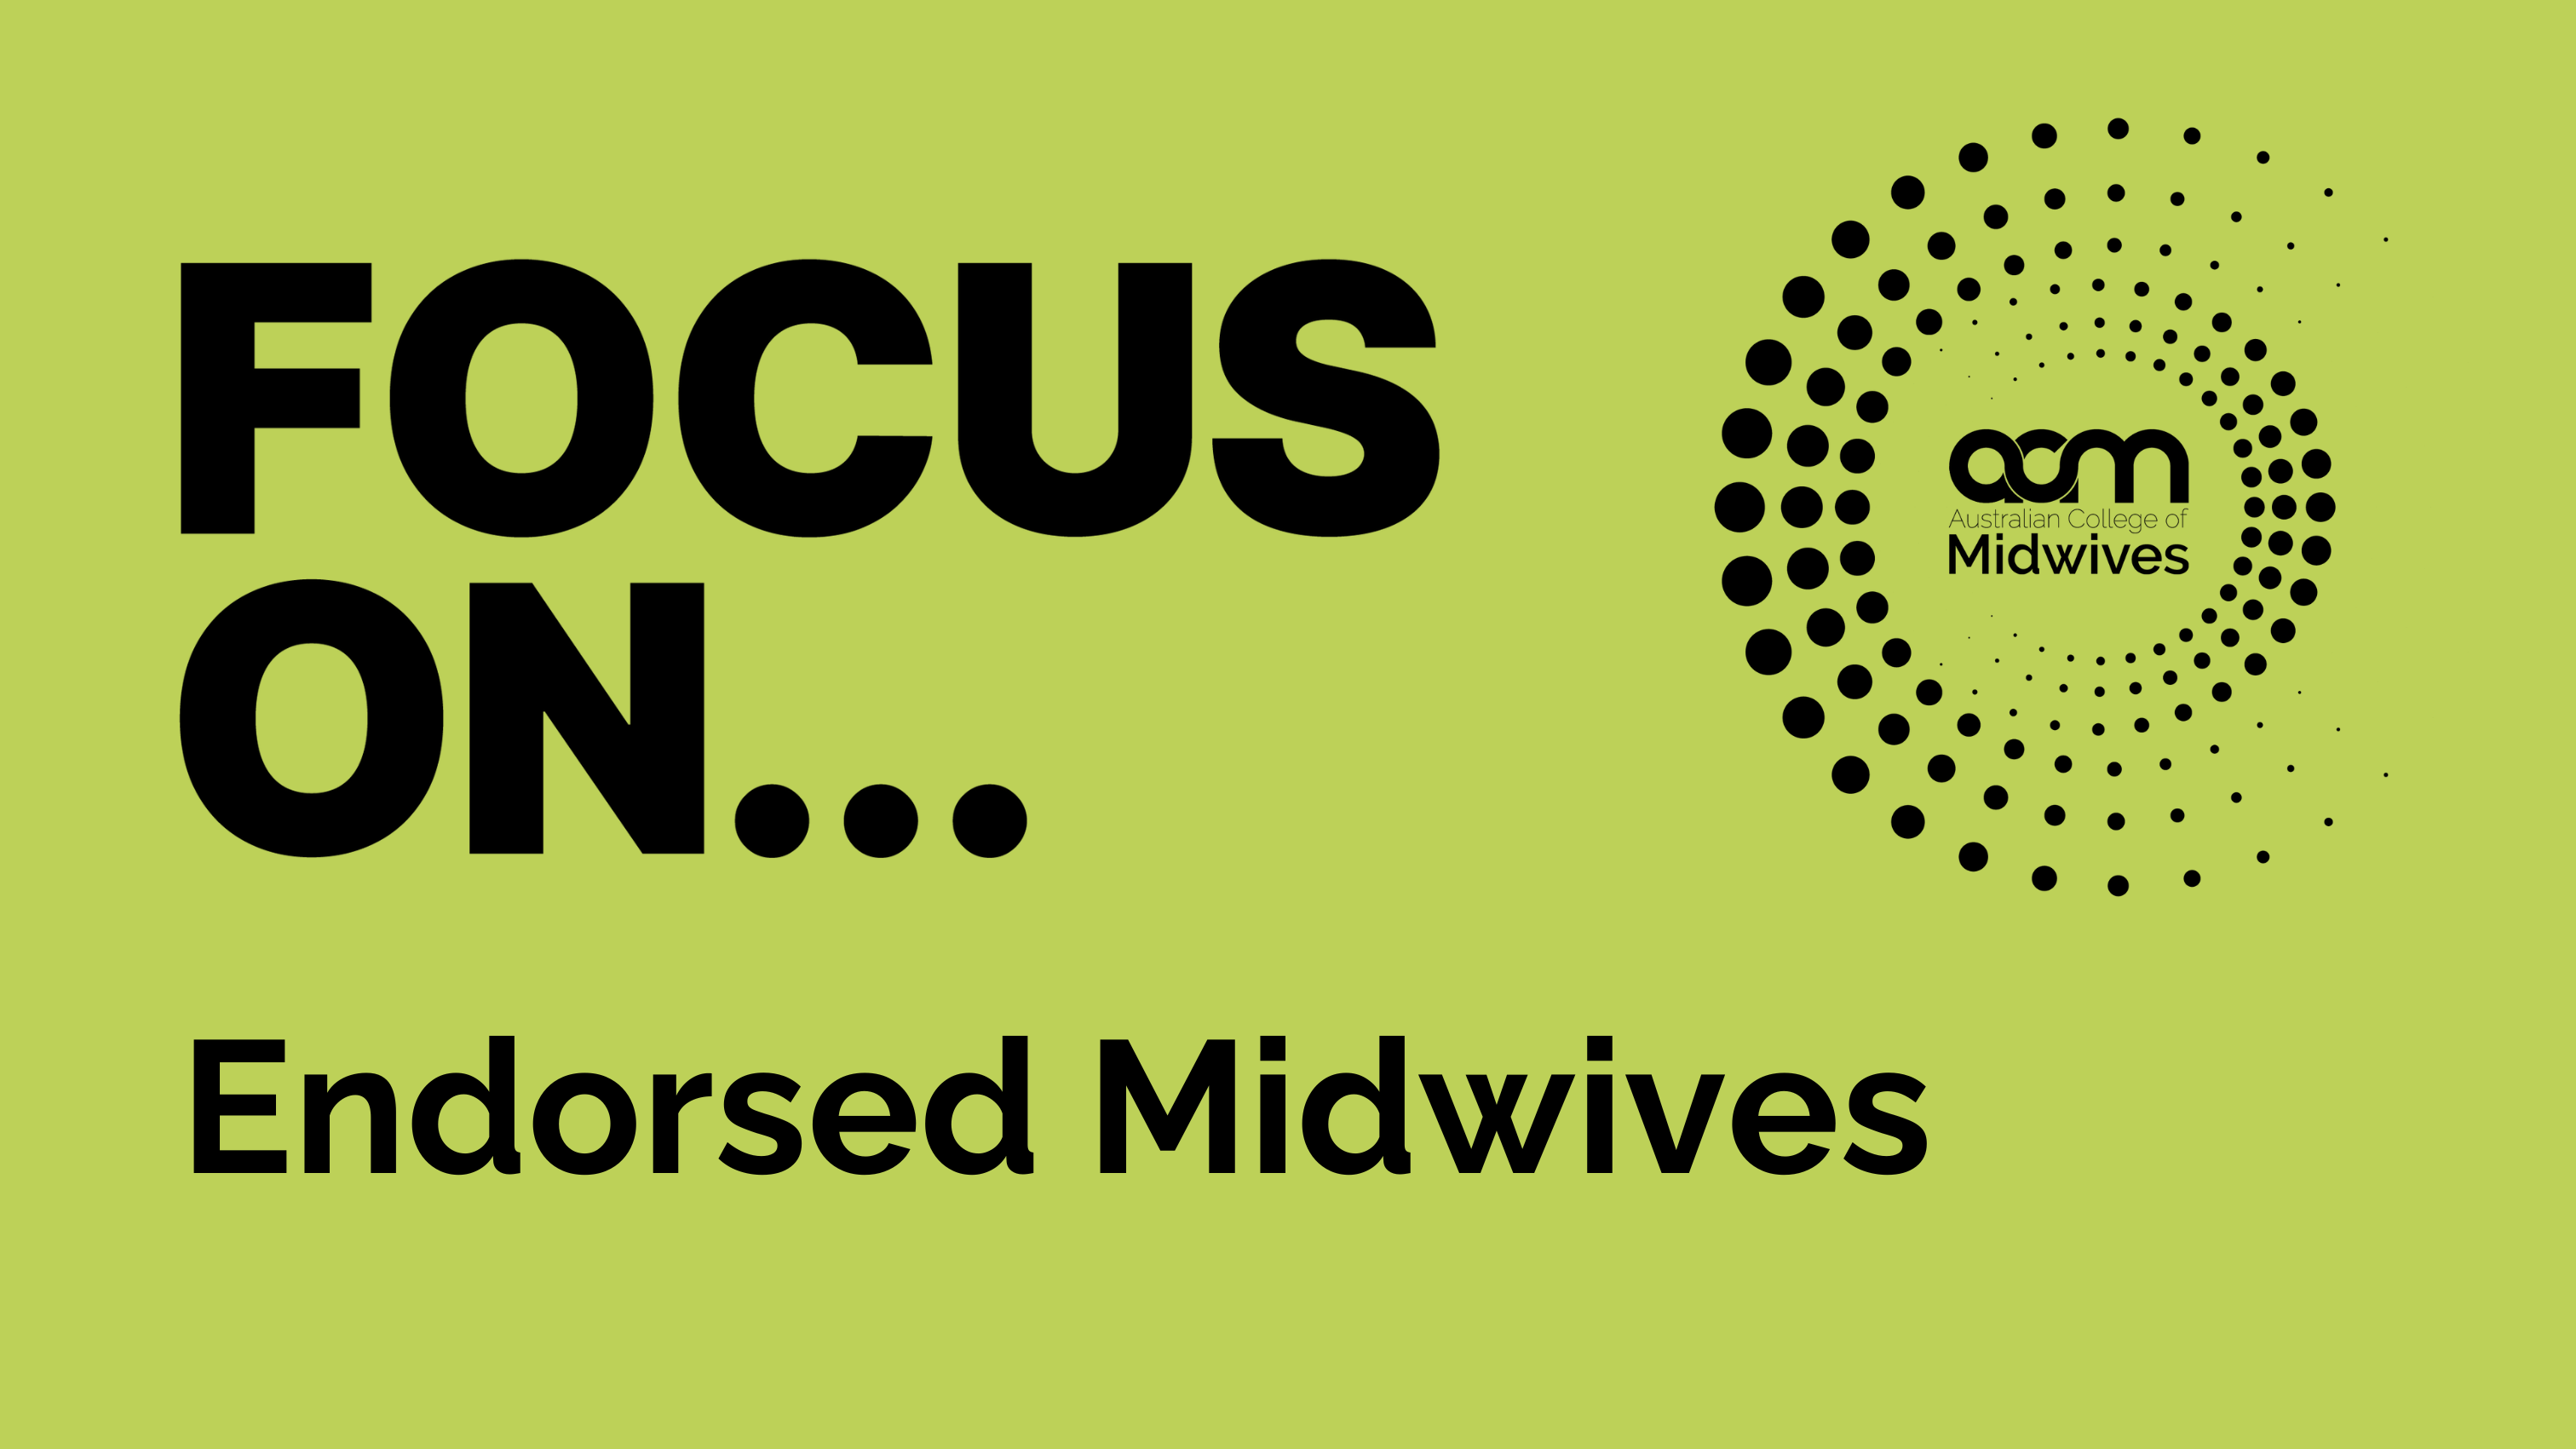 Focus On... Endorsed Midwives Morning Session